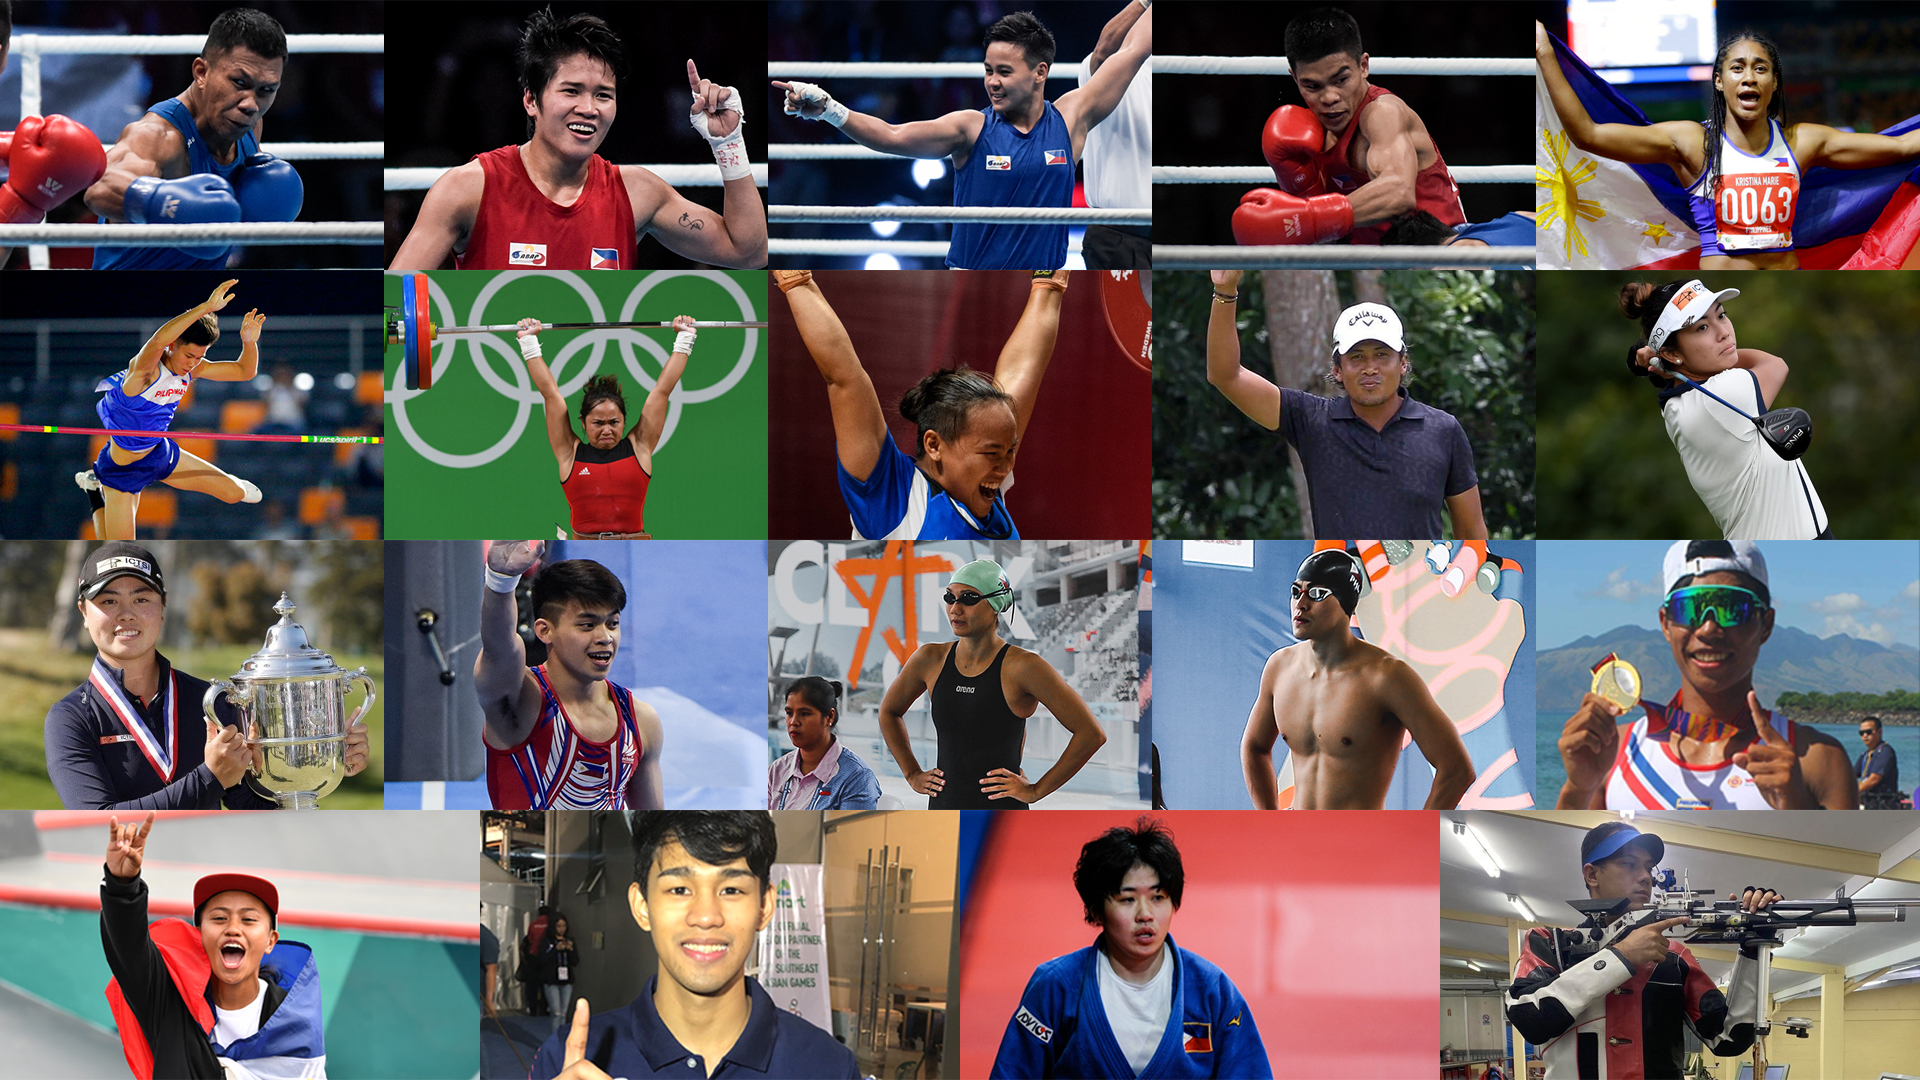 The Filipino athletes competing in the 2020 Tokyo Olympics